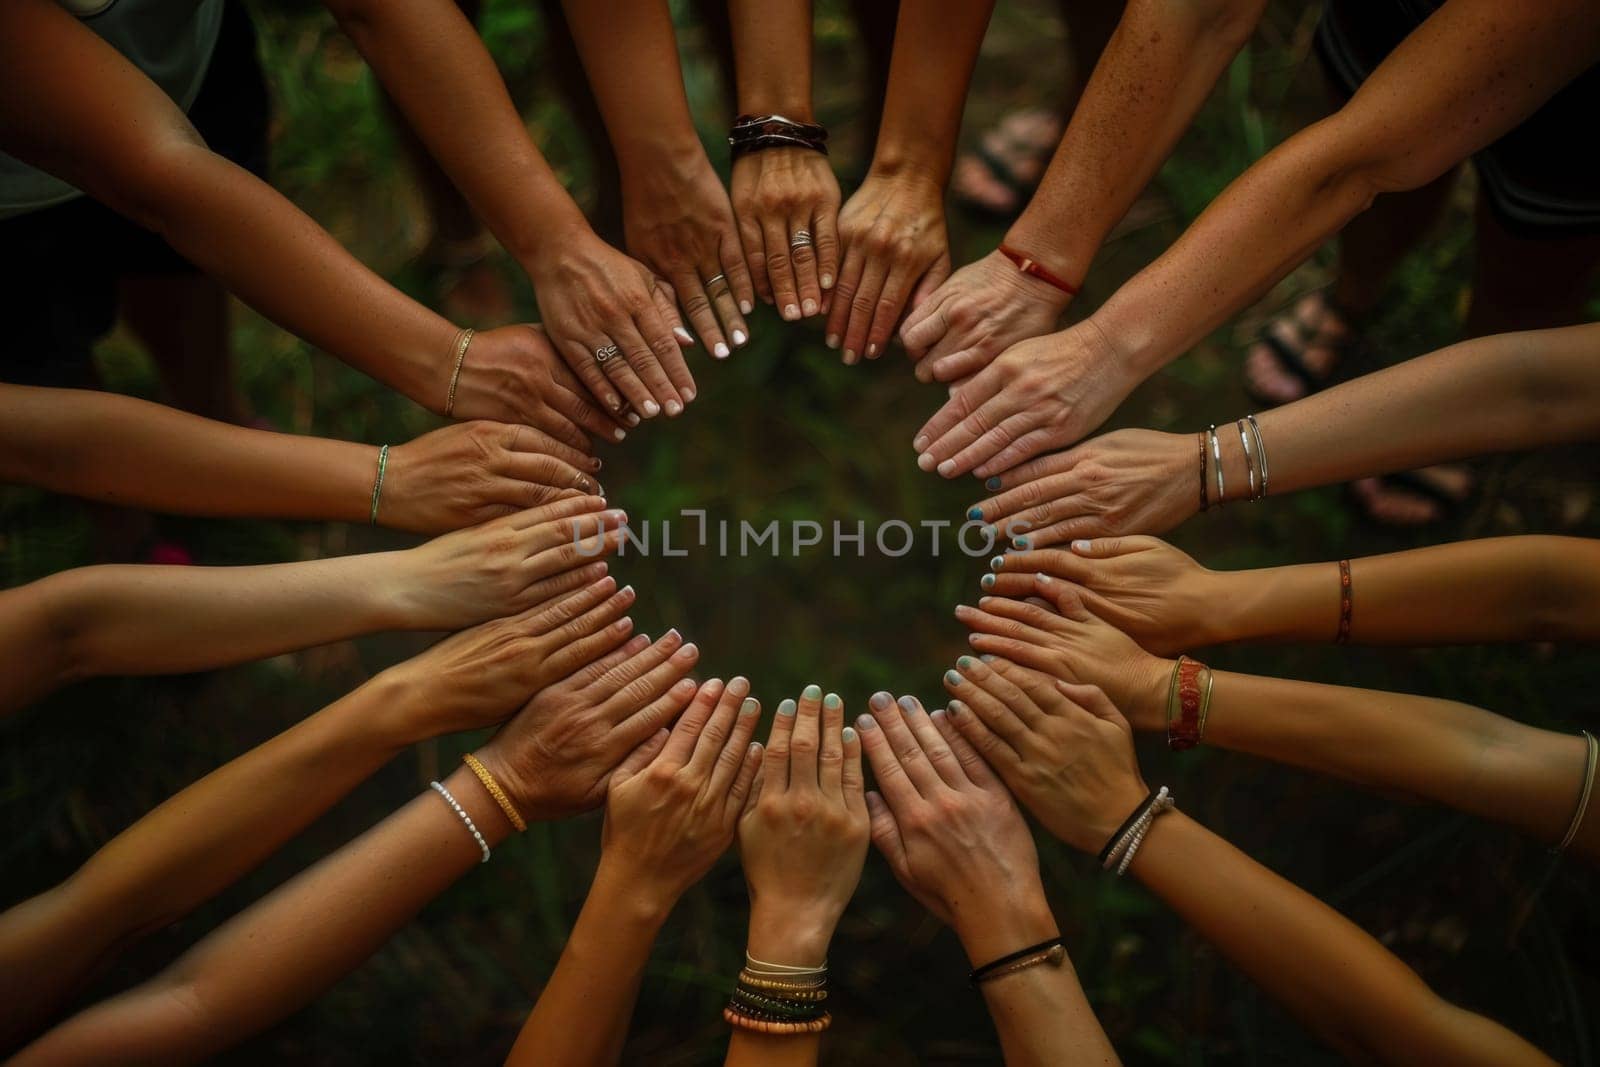 Overhead view captures a diverse group of hands joined together, symbolizing unity and the strength of togetherness.